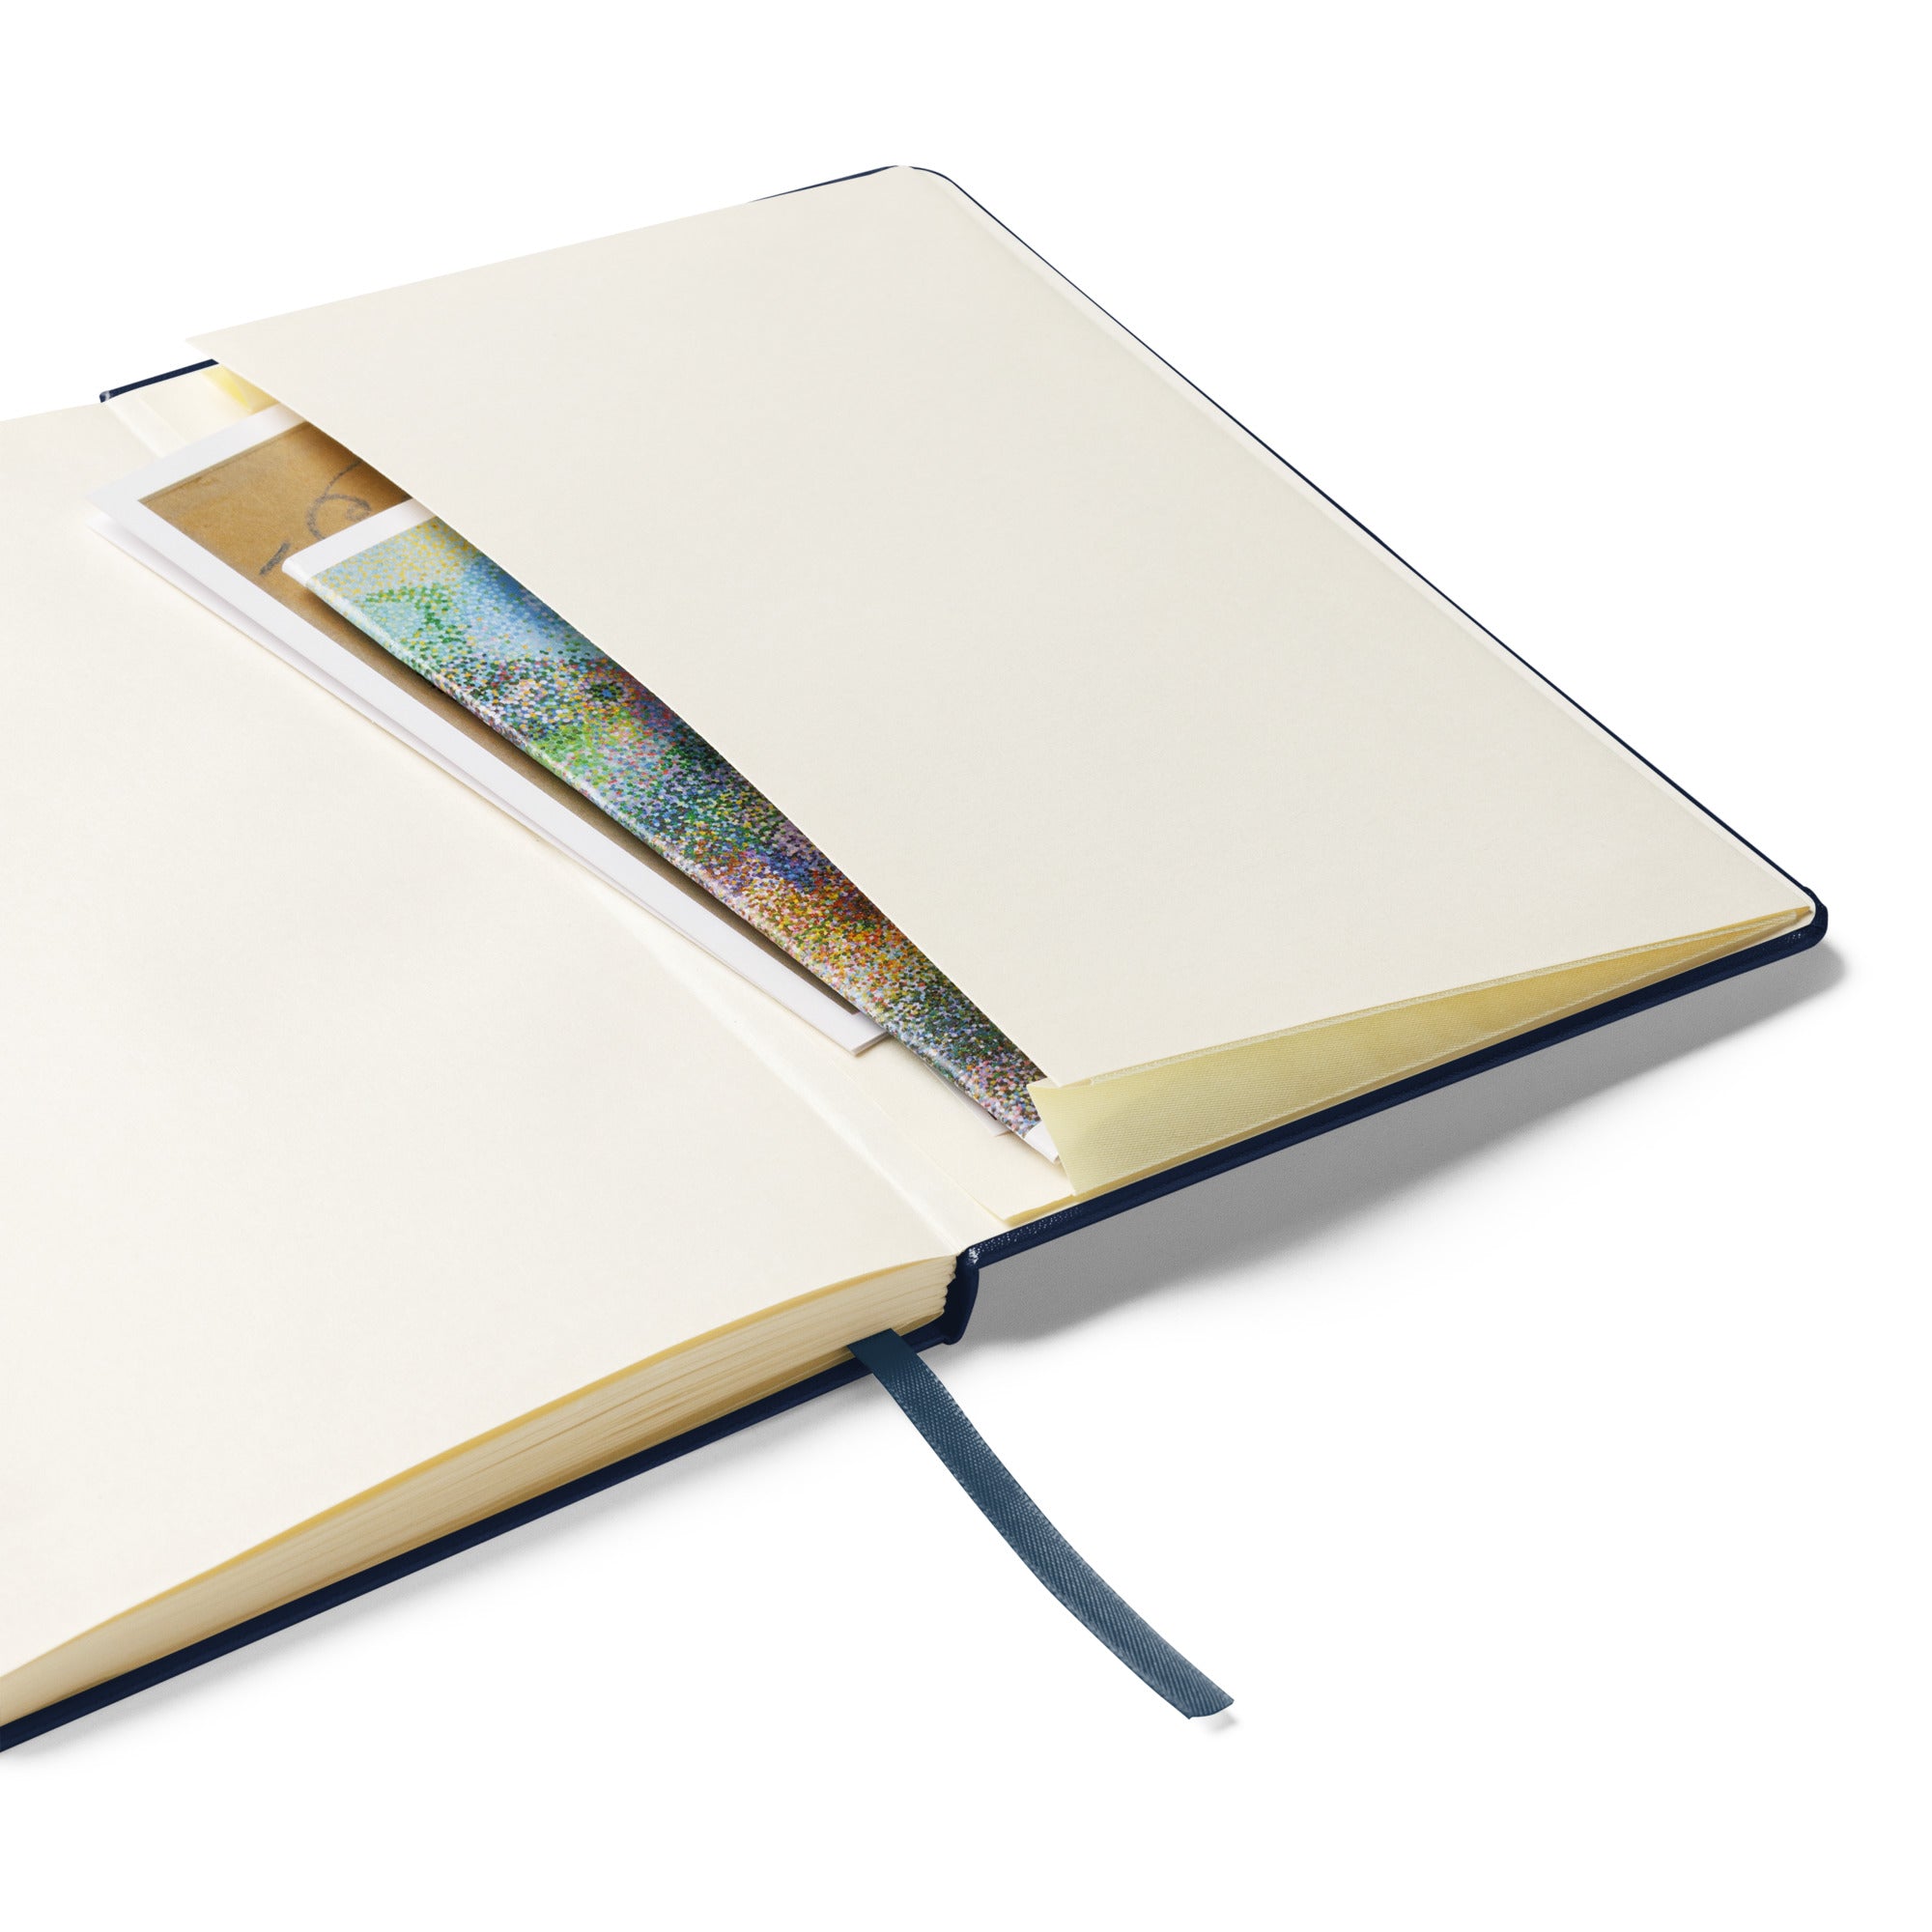 hardcover-bound-notebook-navy-product-details-3-64d29f06c407f.jpg